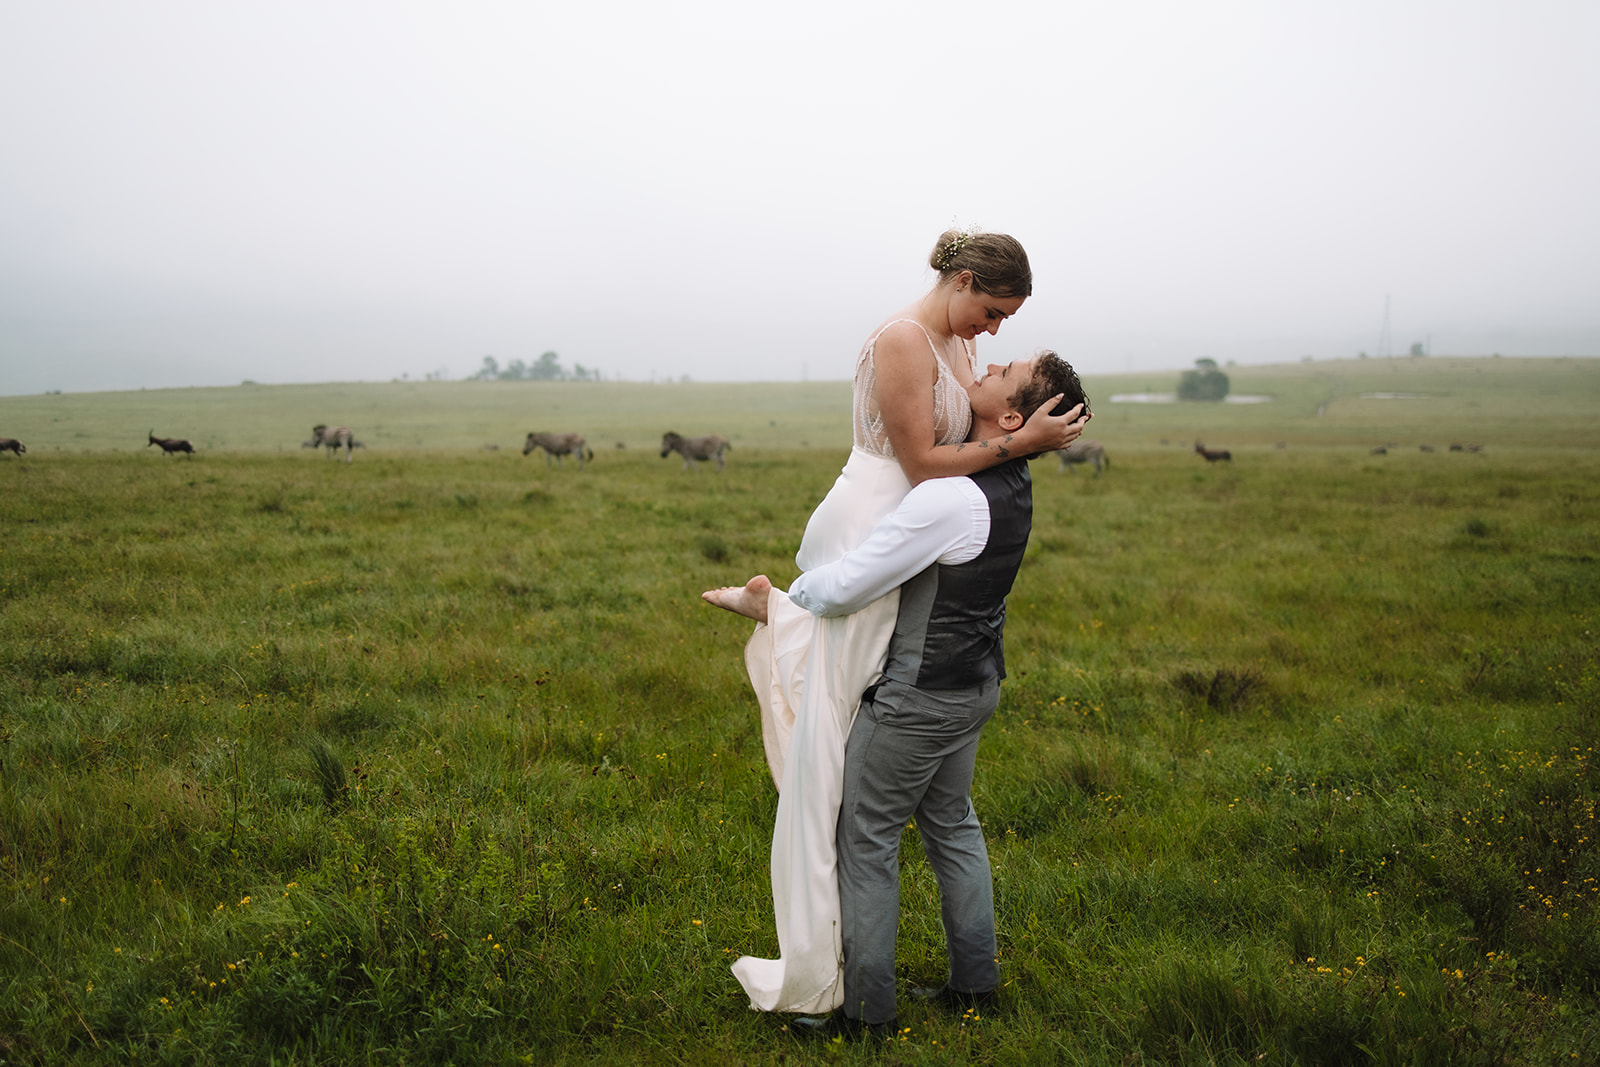 Groom picking up bride in a field of grass in front of Zebra in South Africa